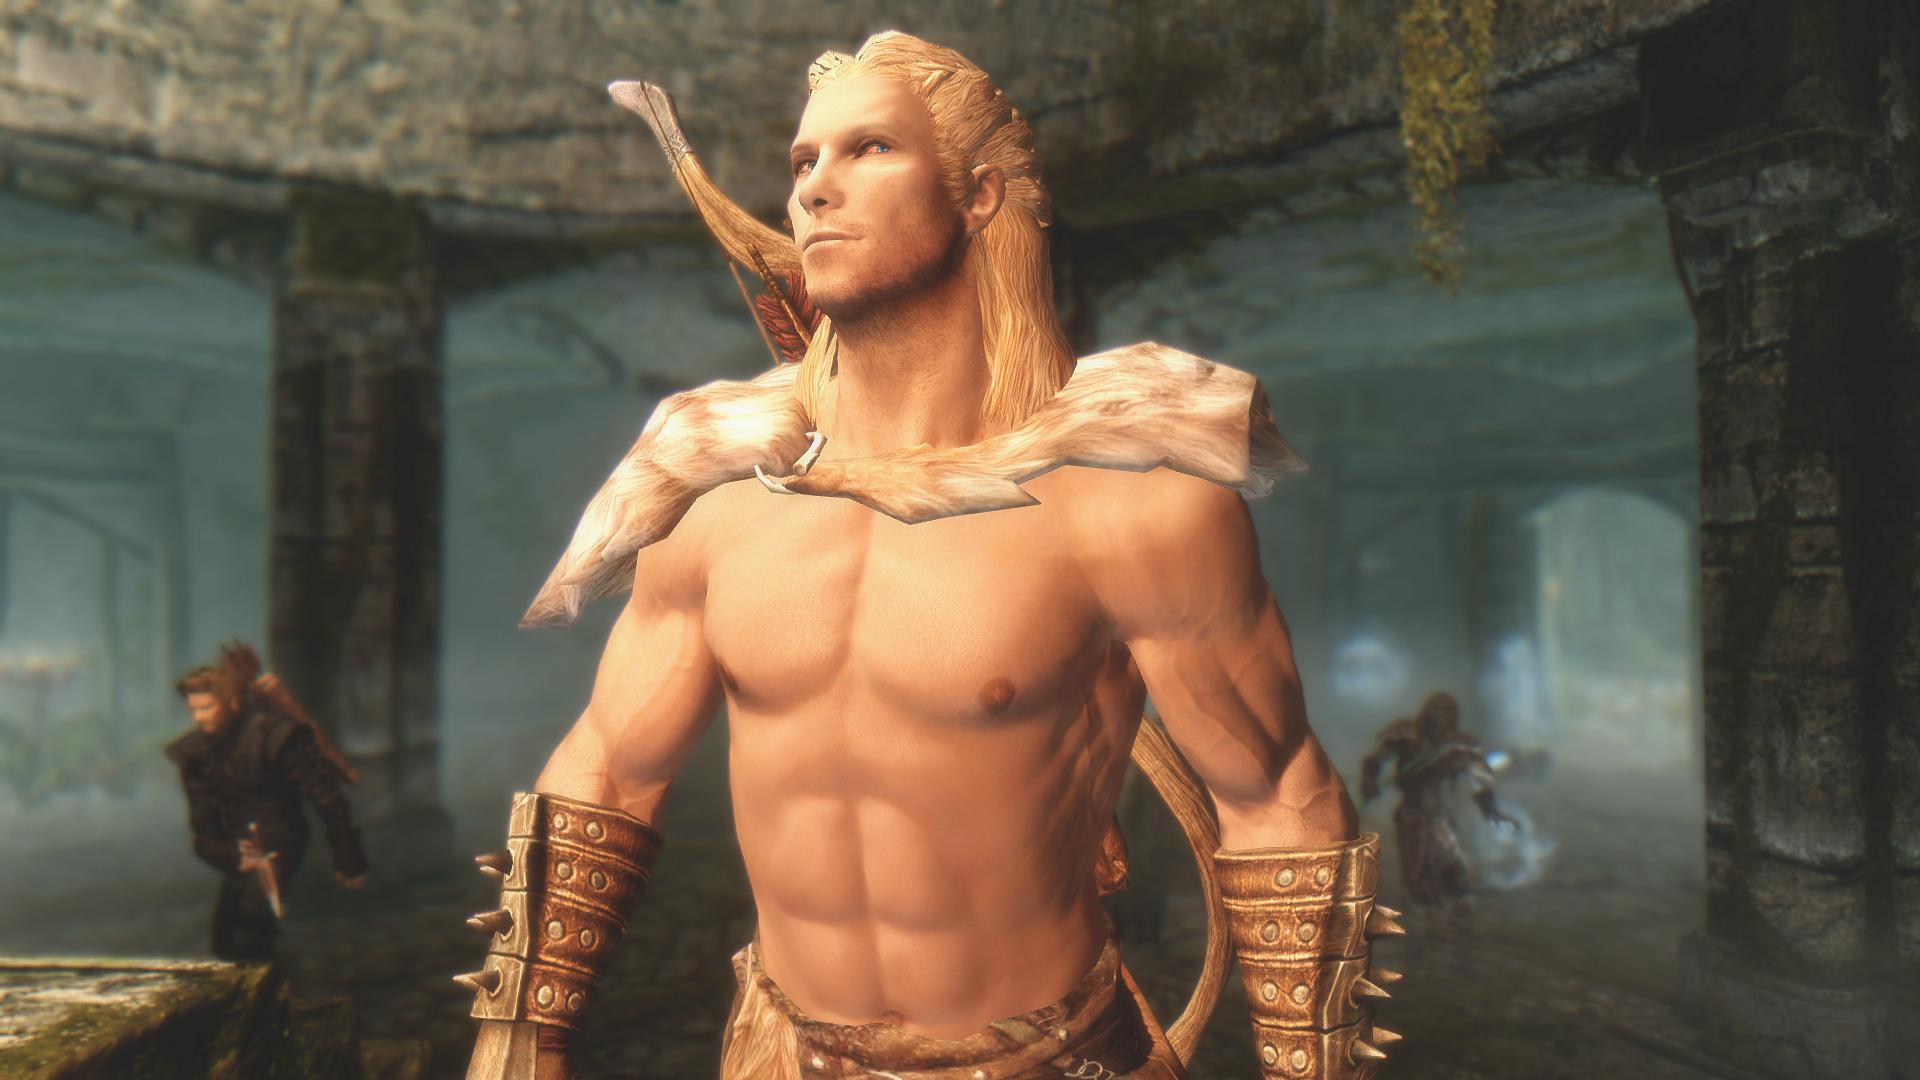 skyrim romance mod where are all the characters